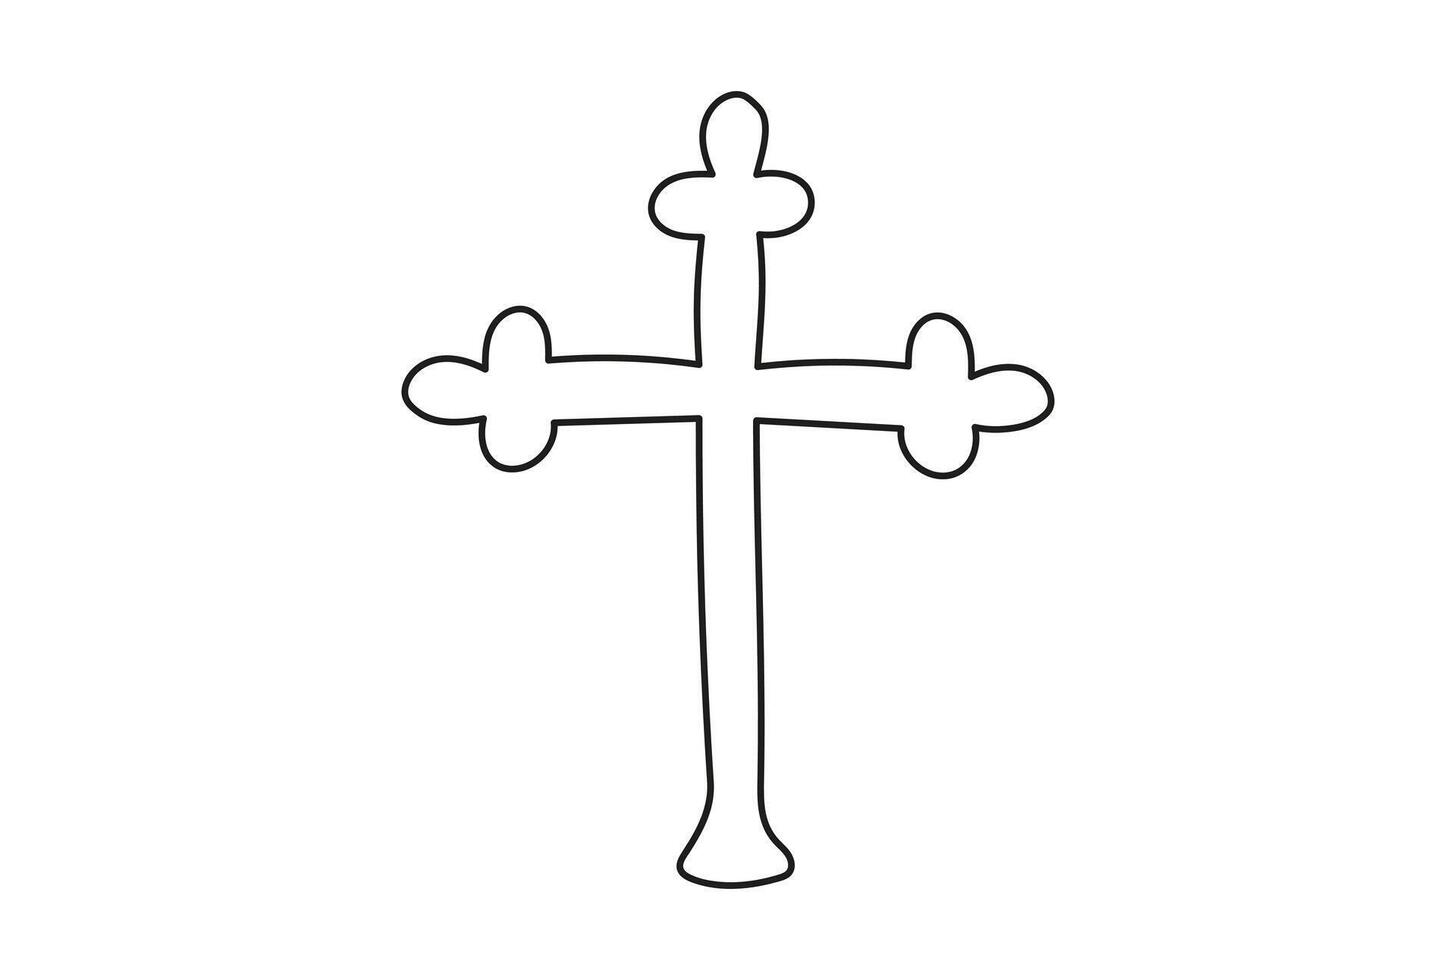 Continuous one line drawing of a cross. Line art. Concept of Easter, faith, spirituality, religion, funeral. Design element. Black and white vector isolated on white backdrop